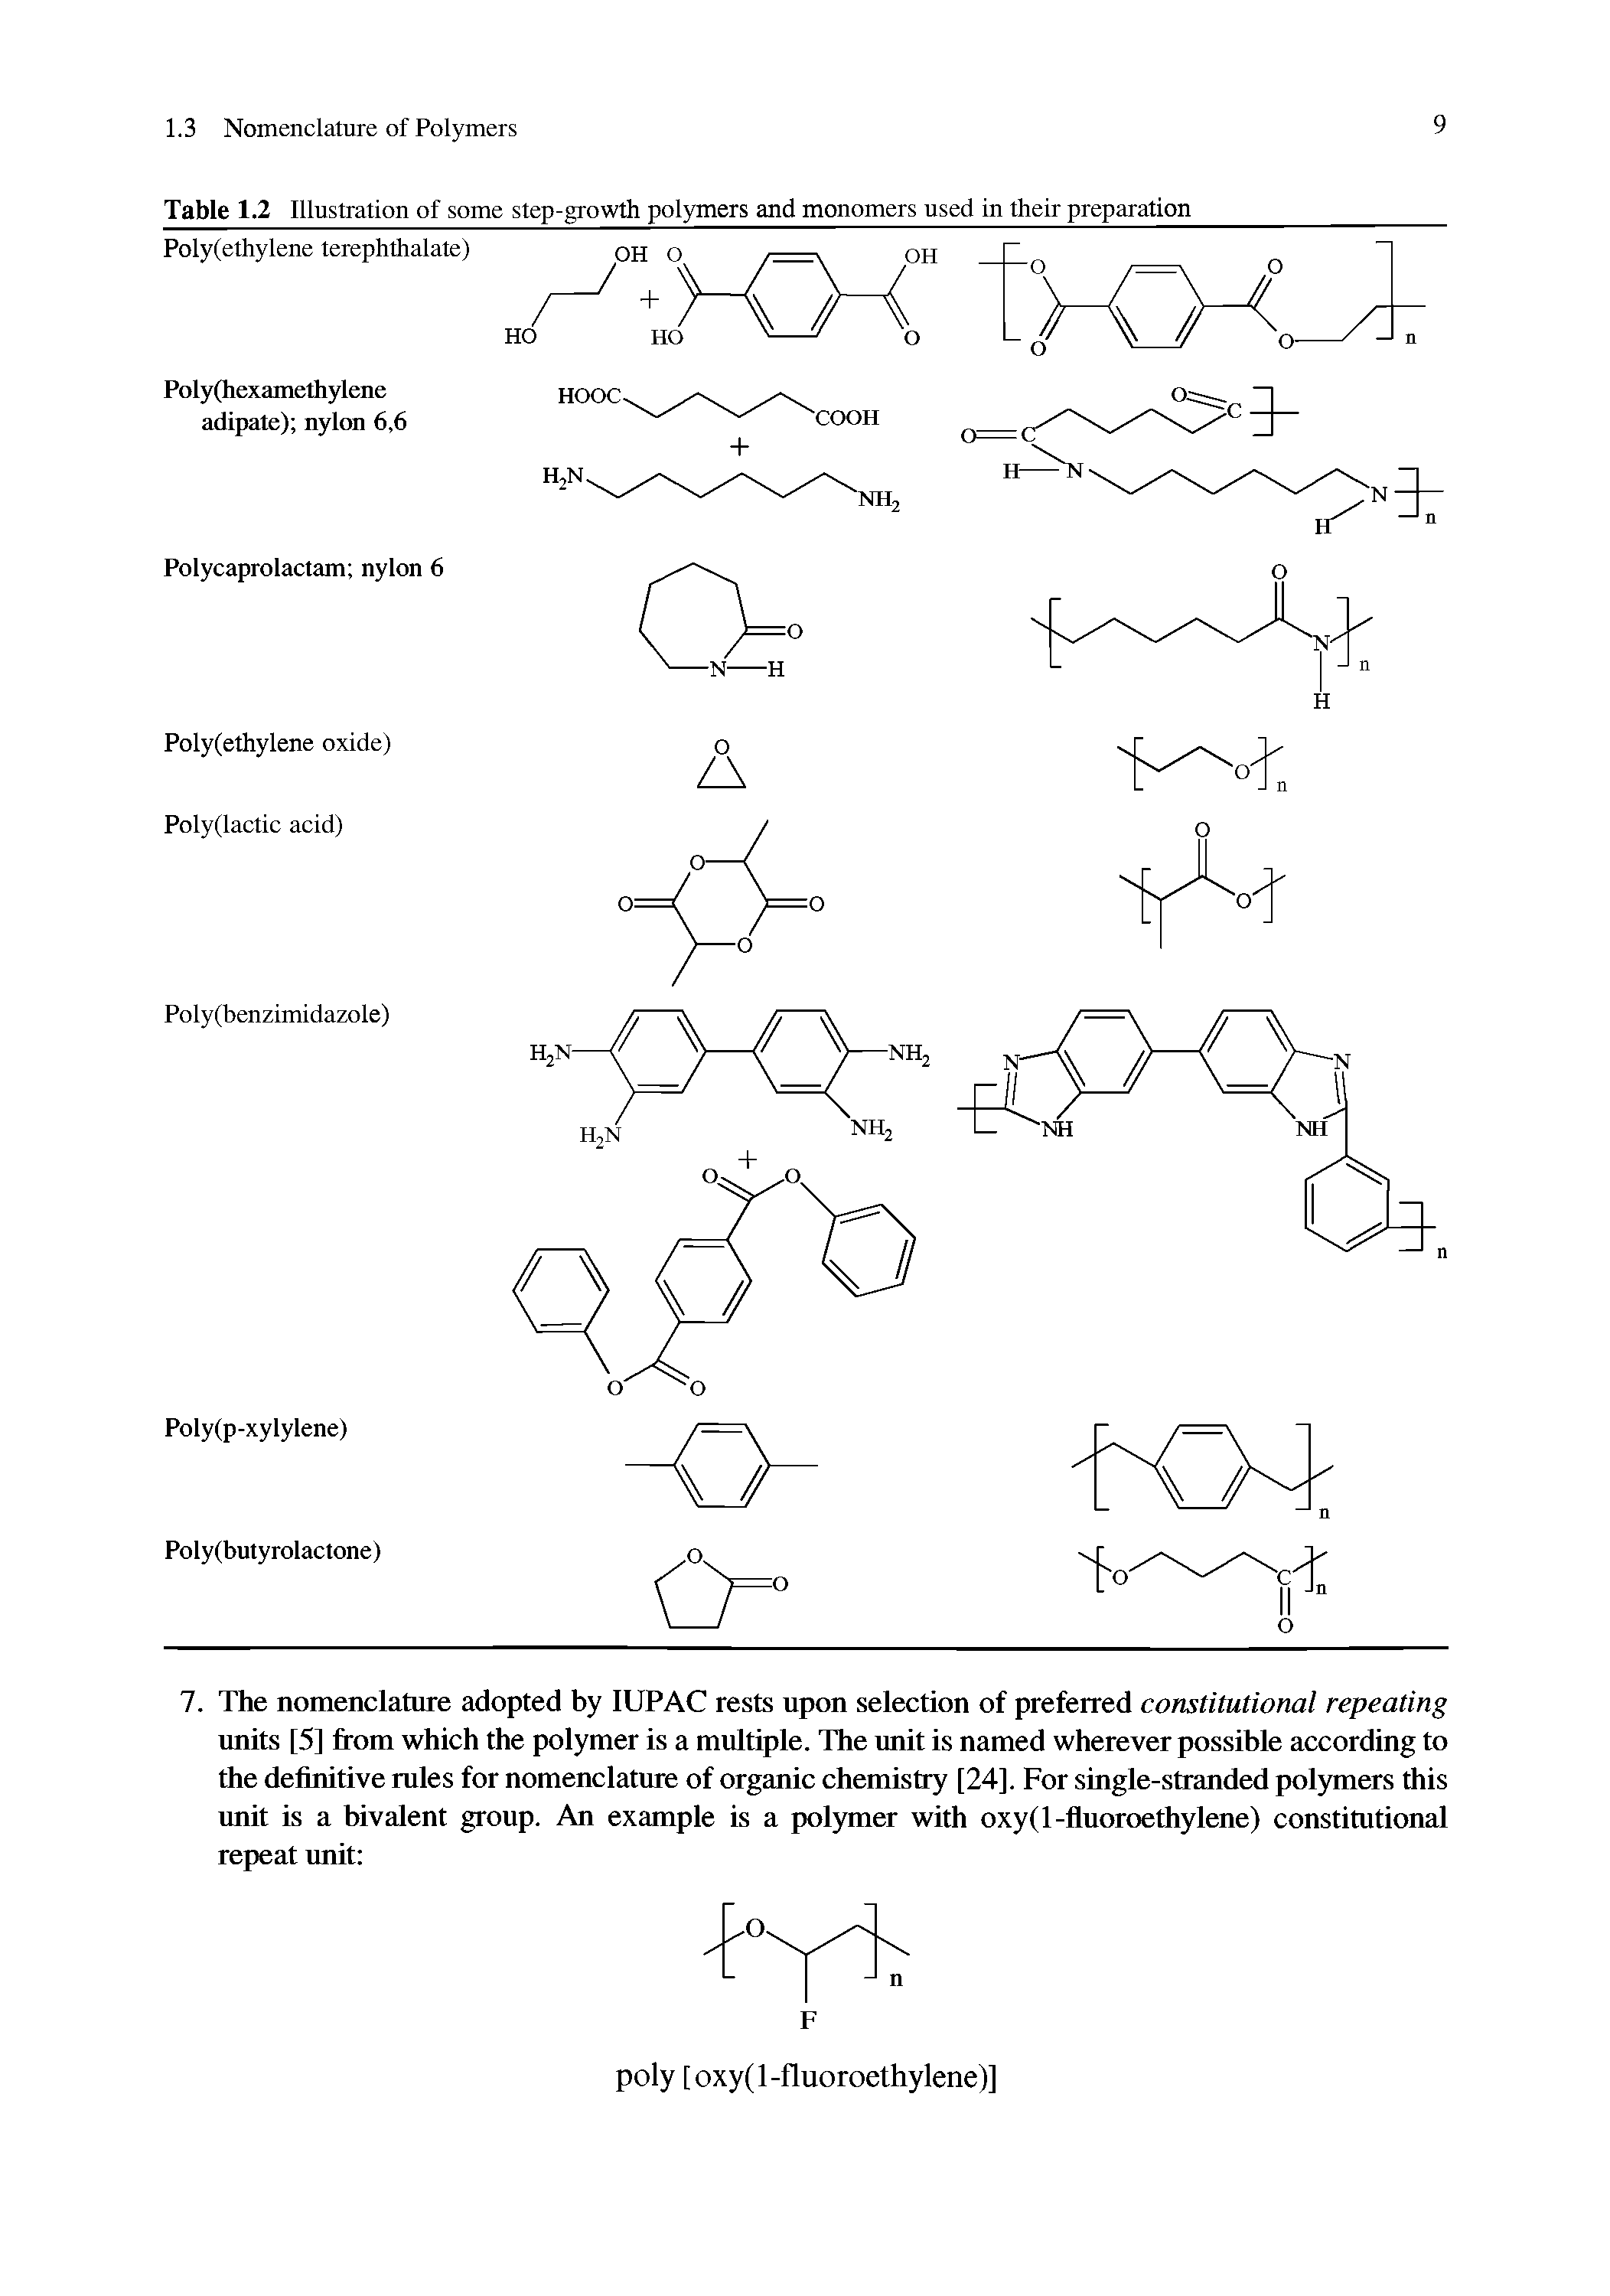 Table 1.2 Illustration of some step-growth polymers and monomers used in their preparation PoIy(ethyIene terephthalate)...